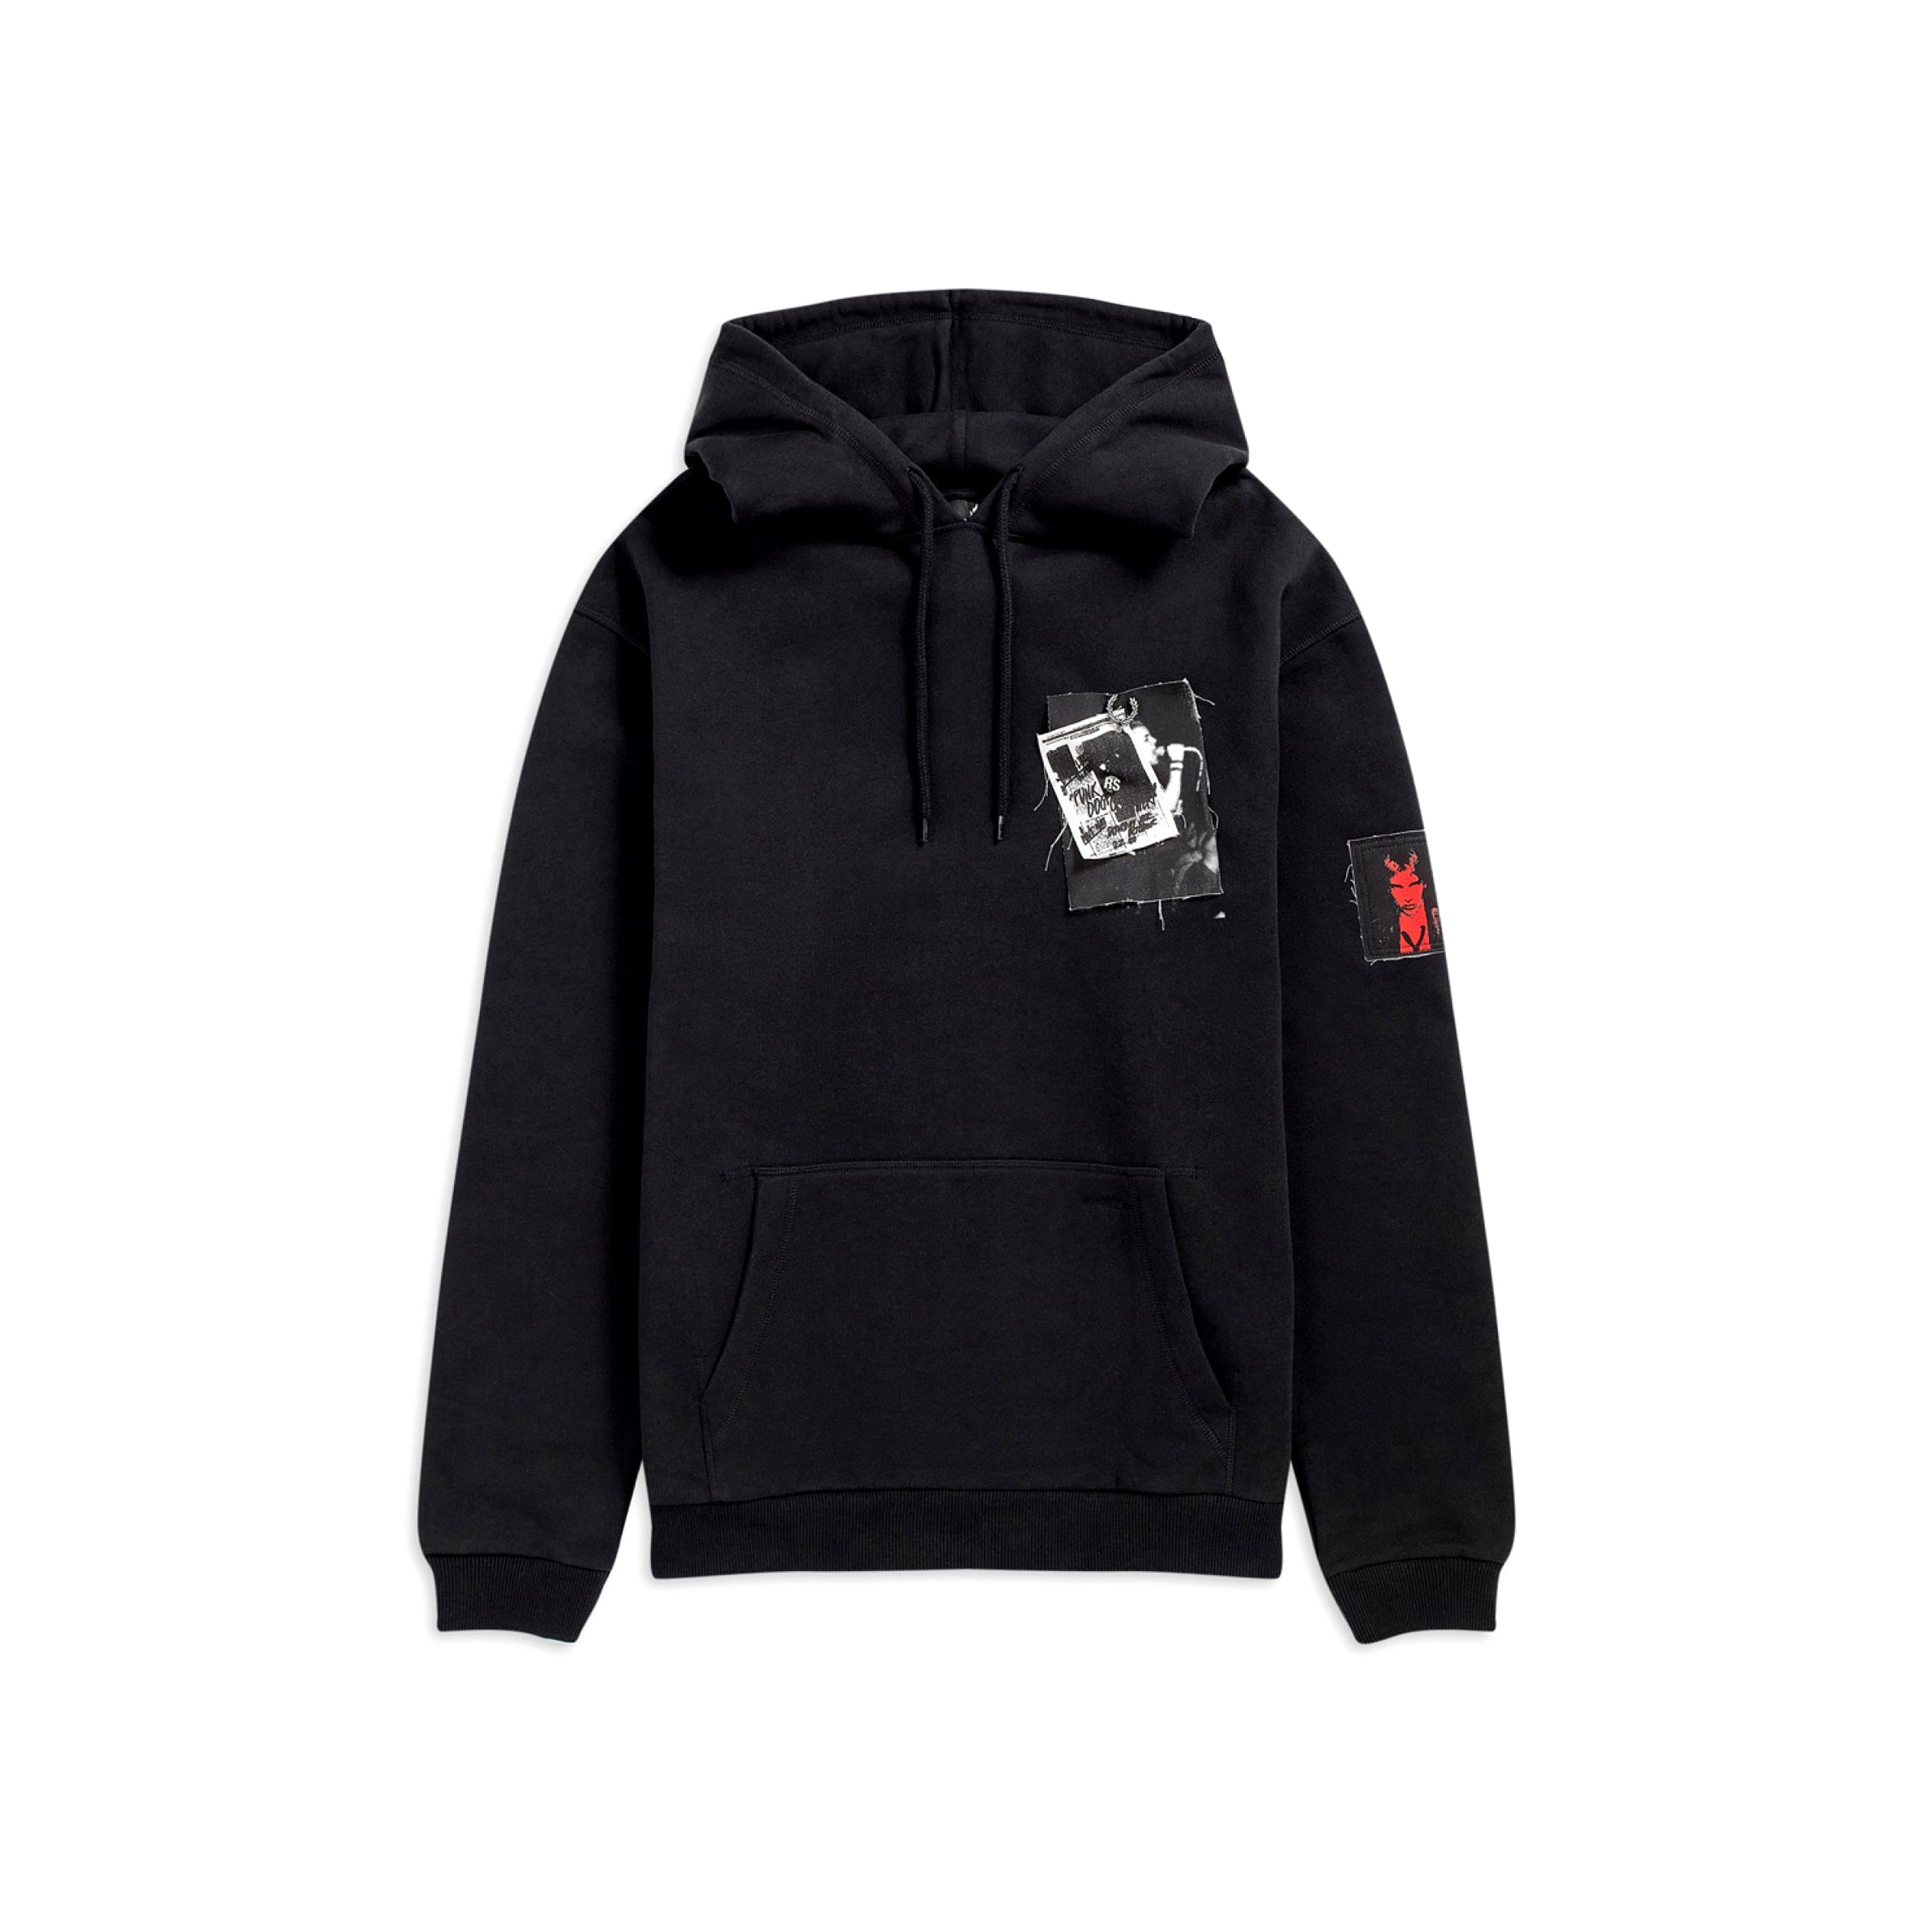 Fred Perry x Raf Simons Pin Printed Patch Hoodie Black